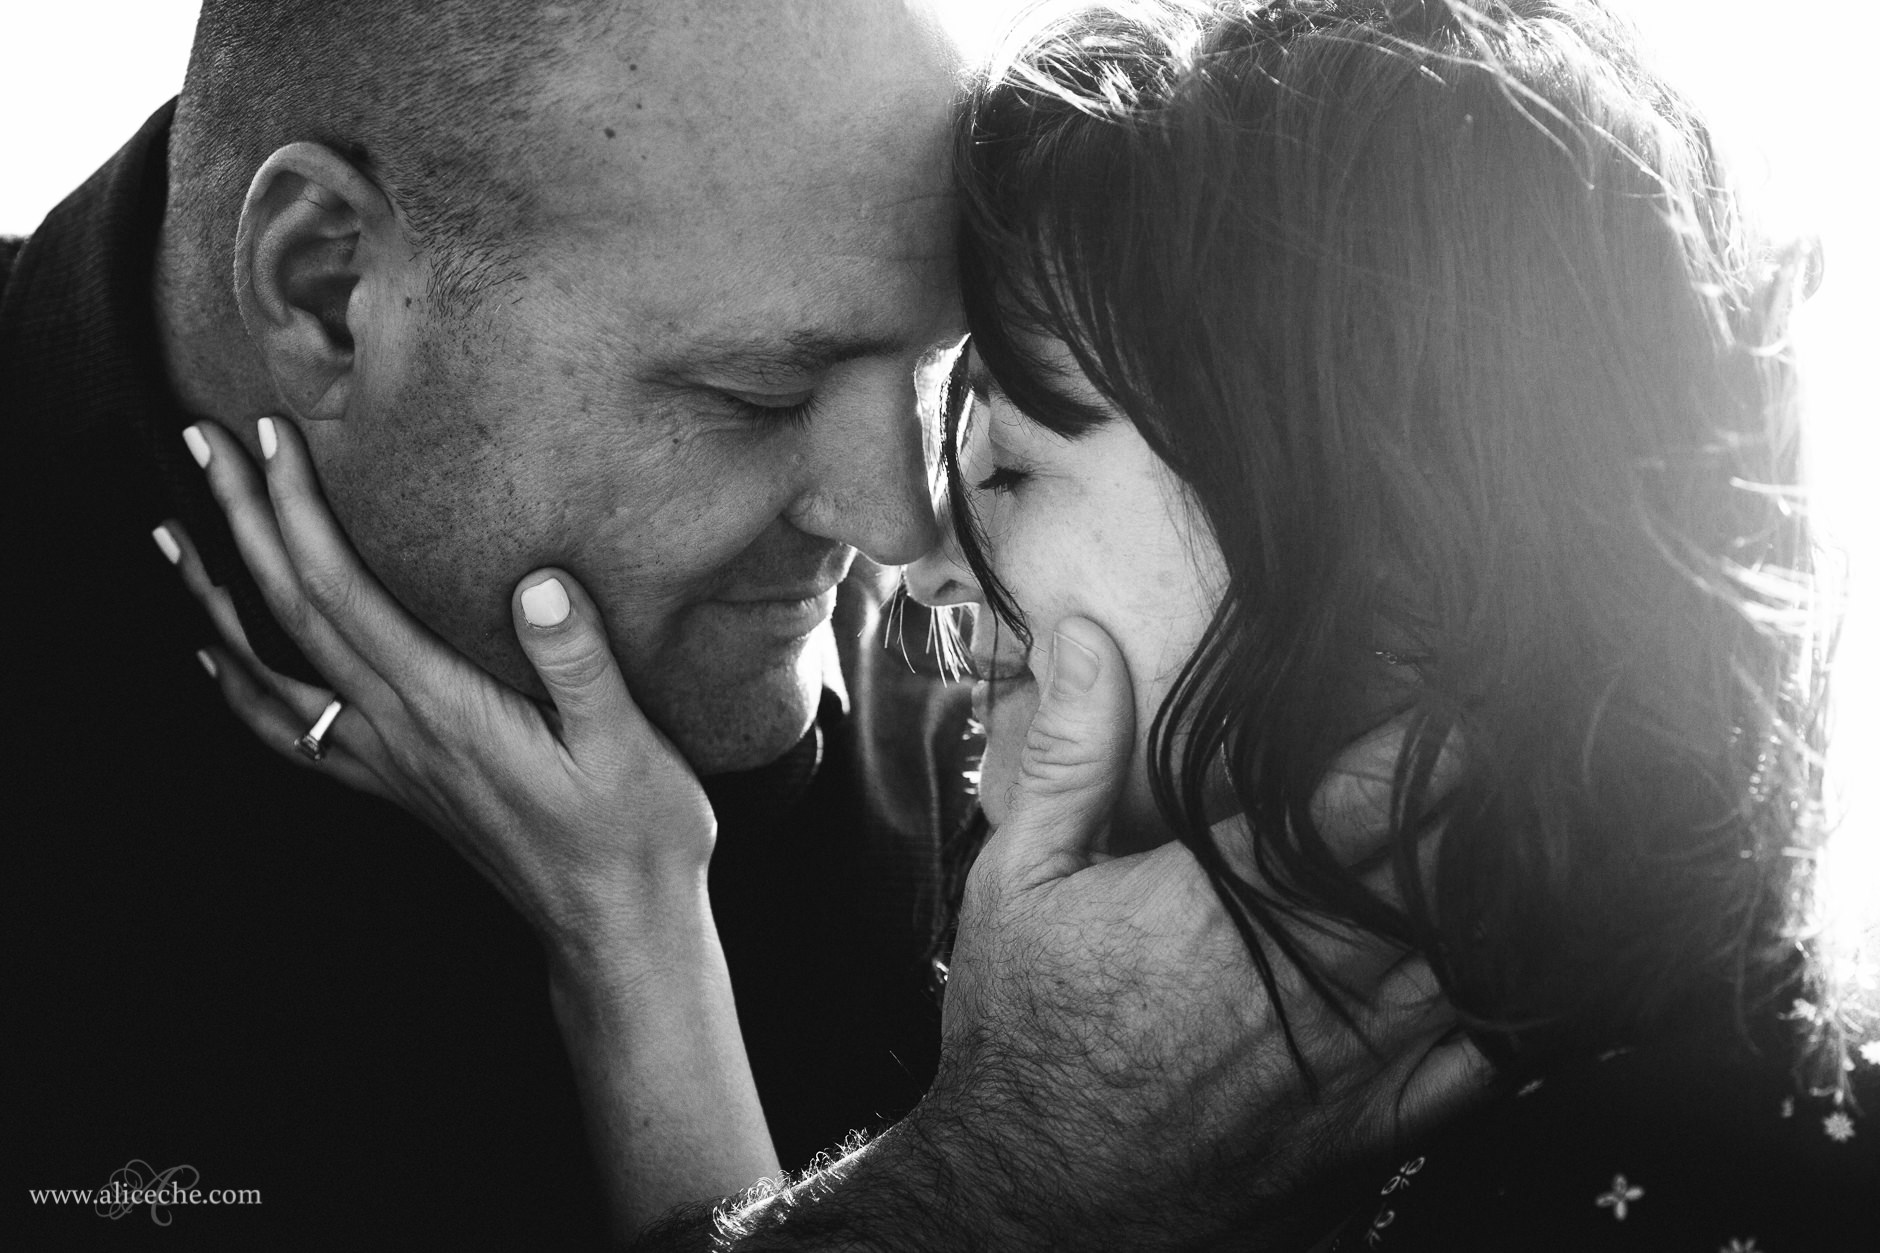 sutro-baths-proposal-backlit-black-and-white-emotional-intimate-engagement-photo-alice-che-94121